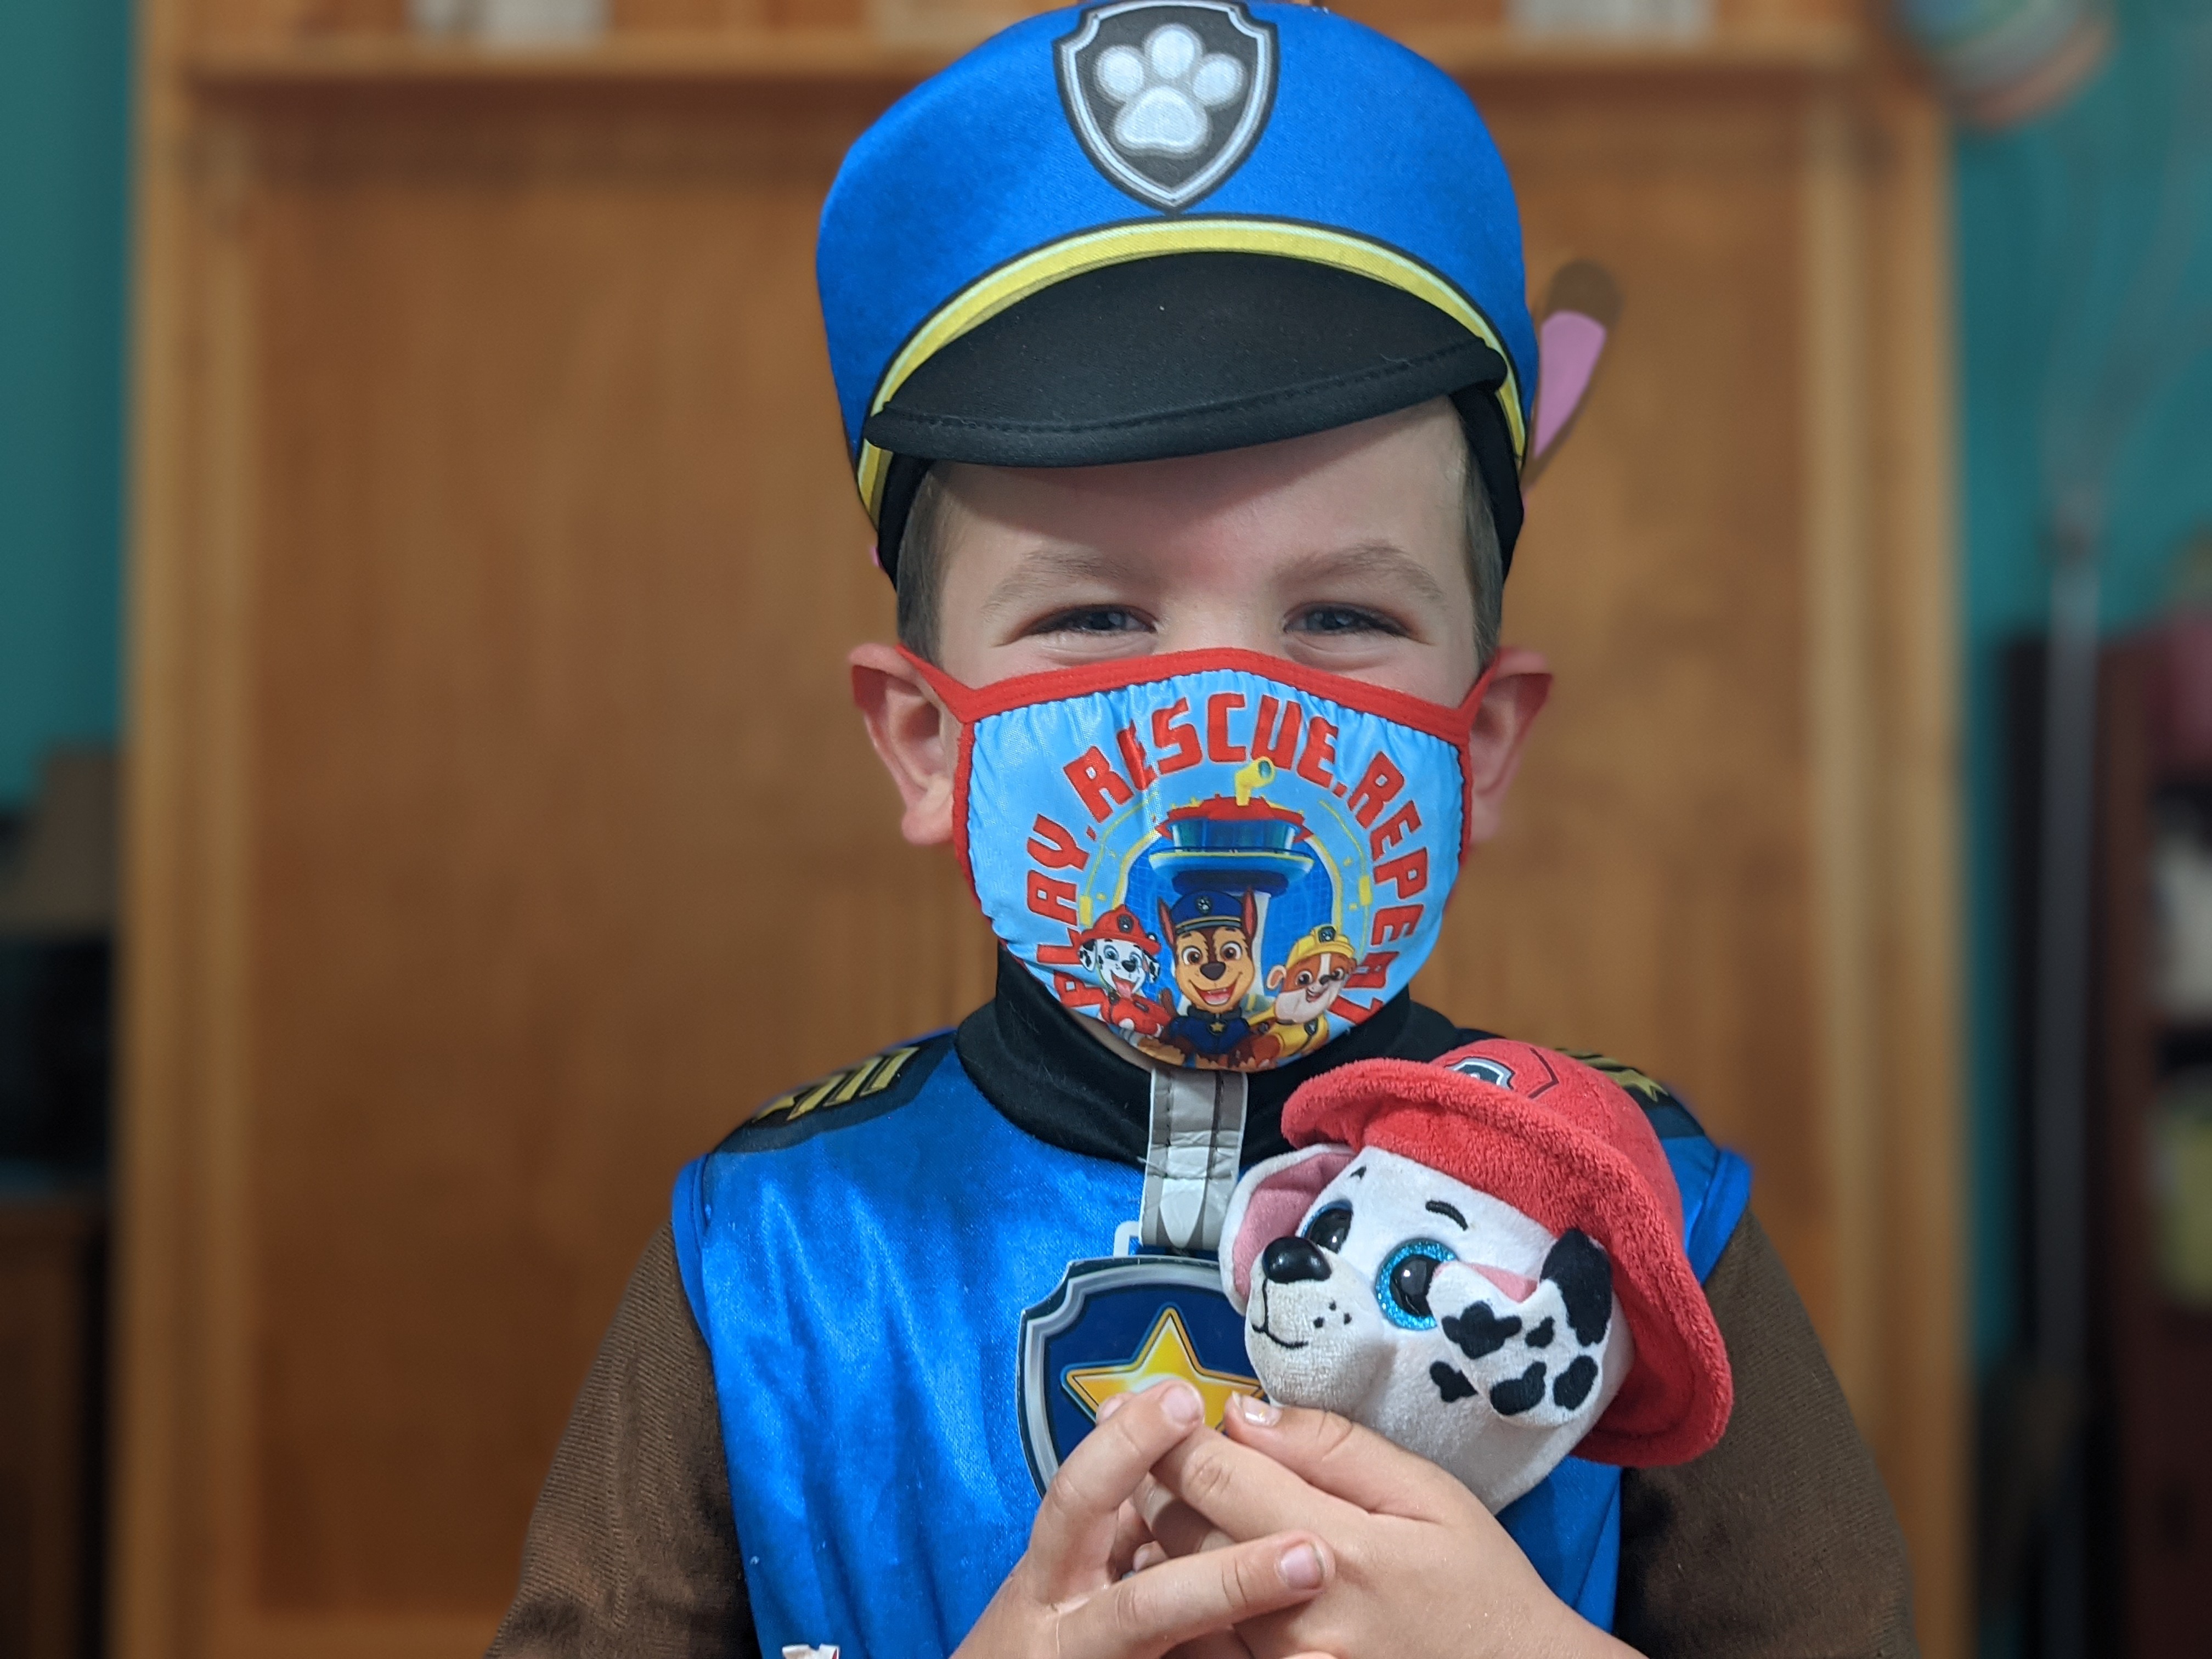 Chase from Paw Patrol with face paint